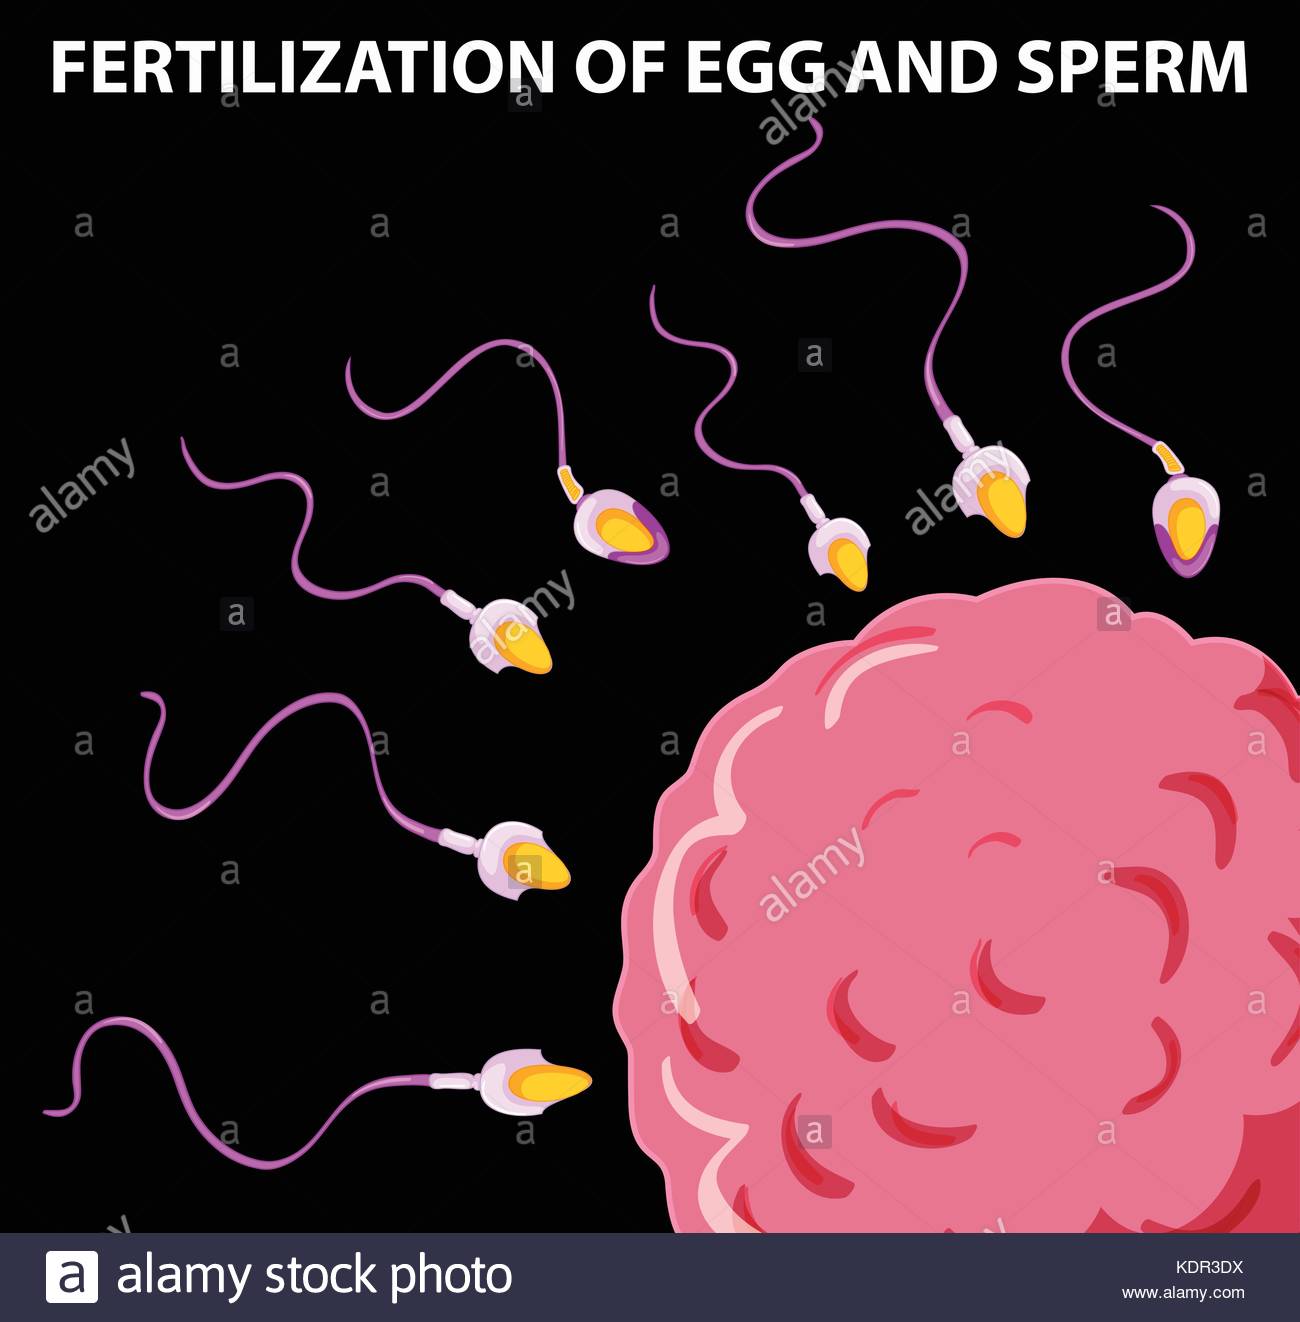 Illistrated pictures of sperm fertilizing egg